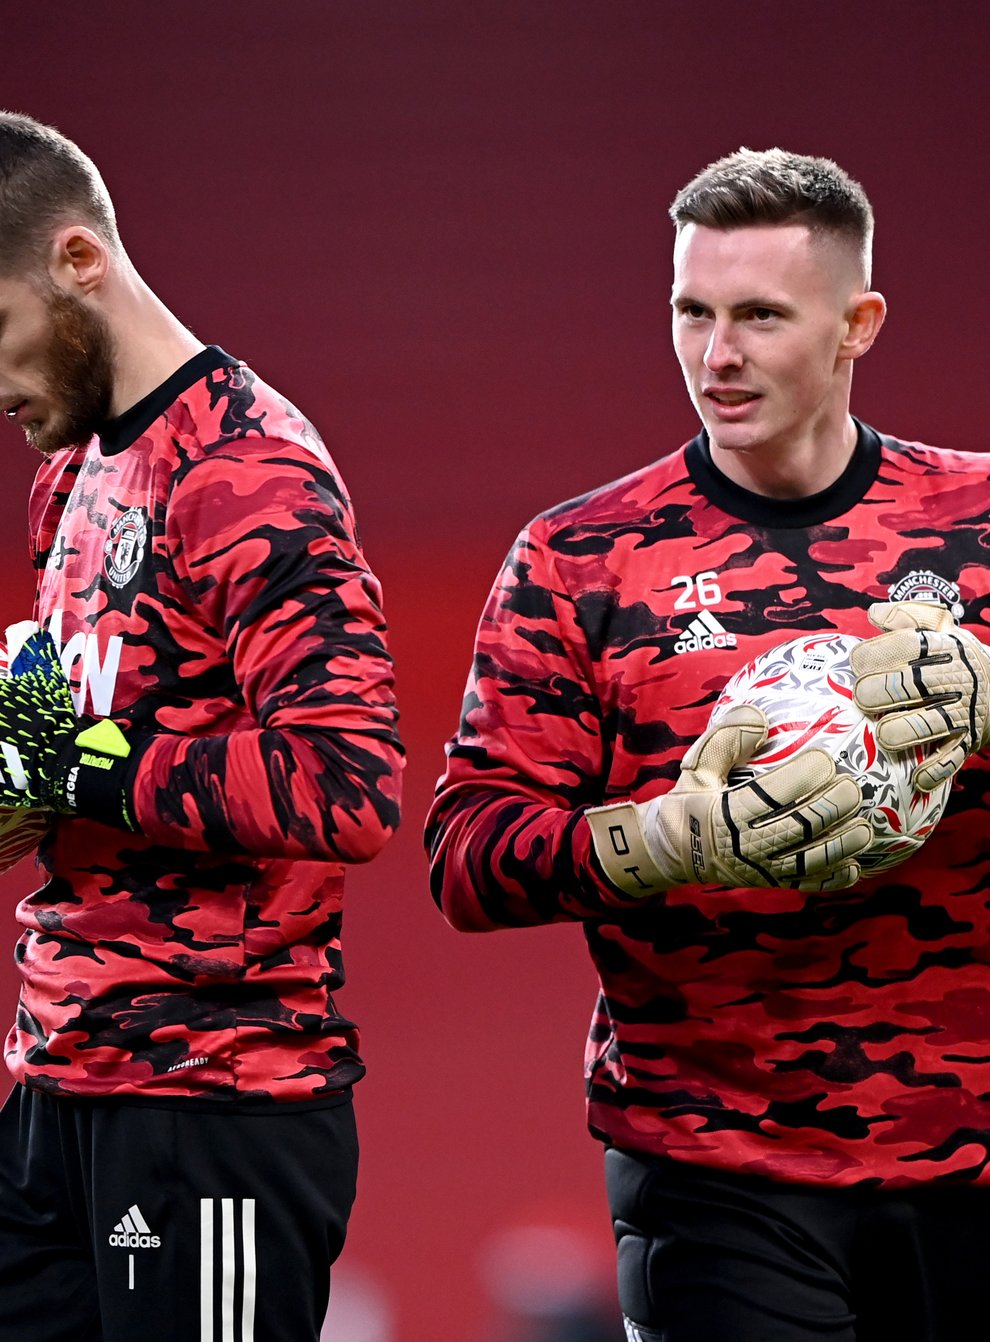 A question mark hangs over which of David De Gea (left) or Dean Henderson (right) will play in goal for Manchester United against Brighton (Laurence Griffiths/PA).